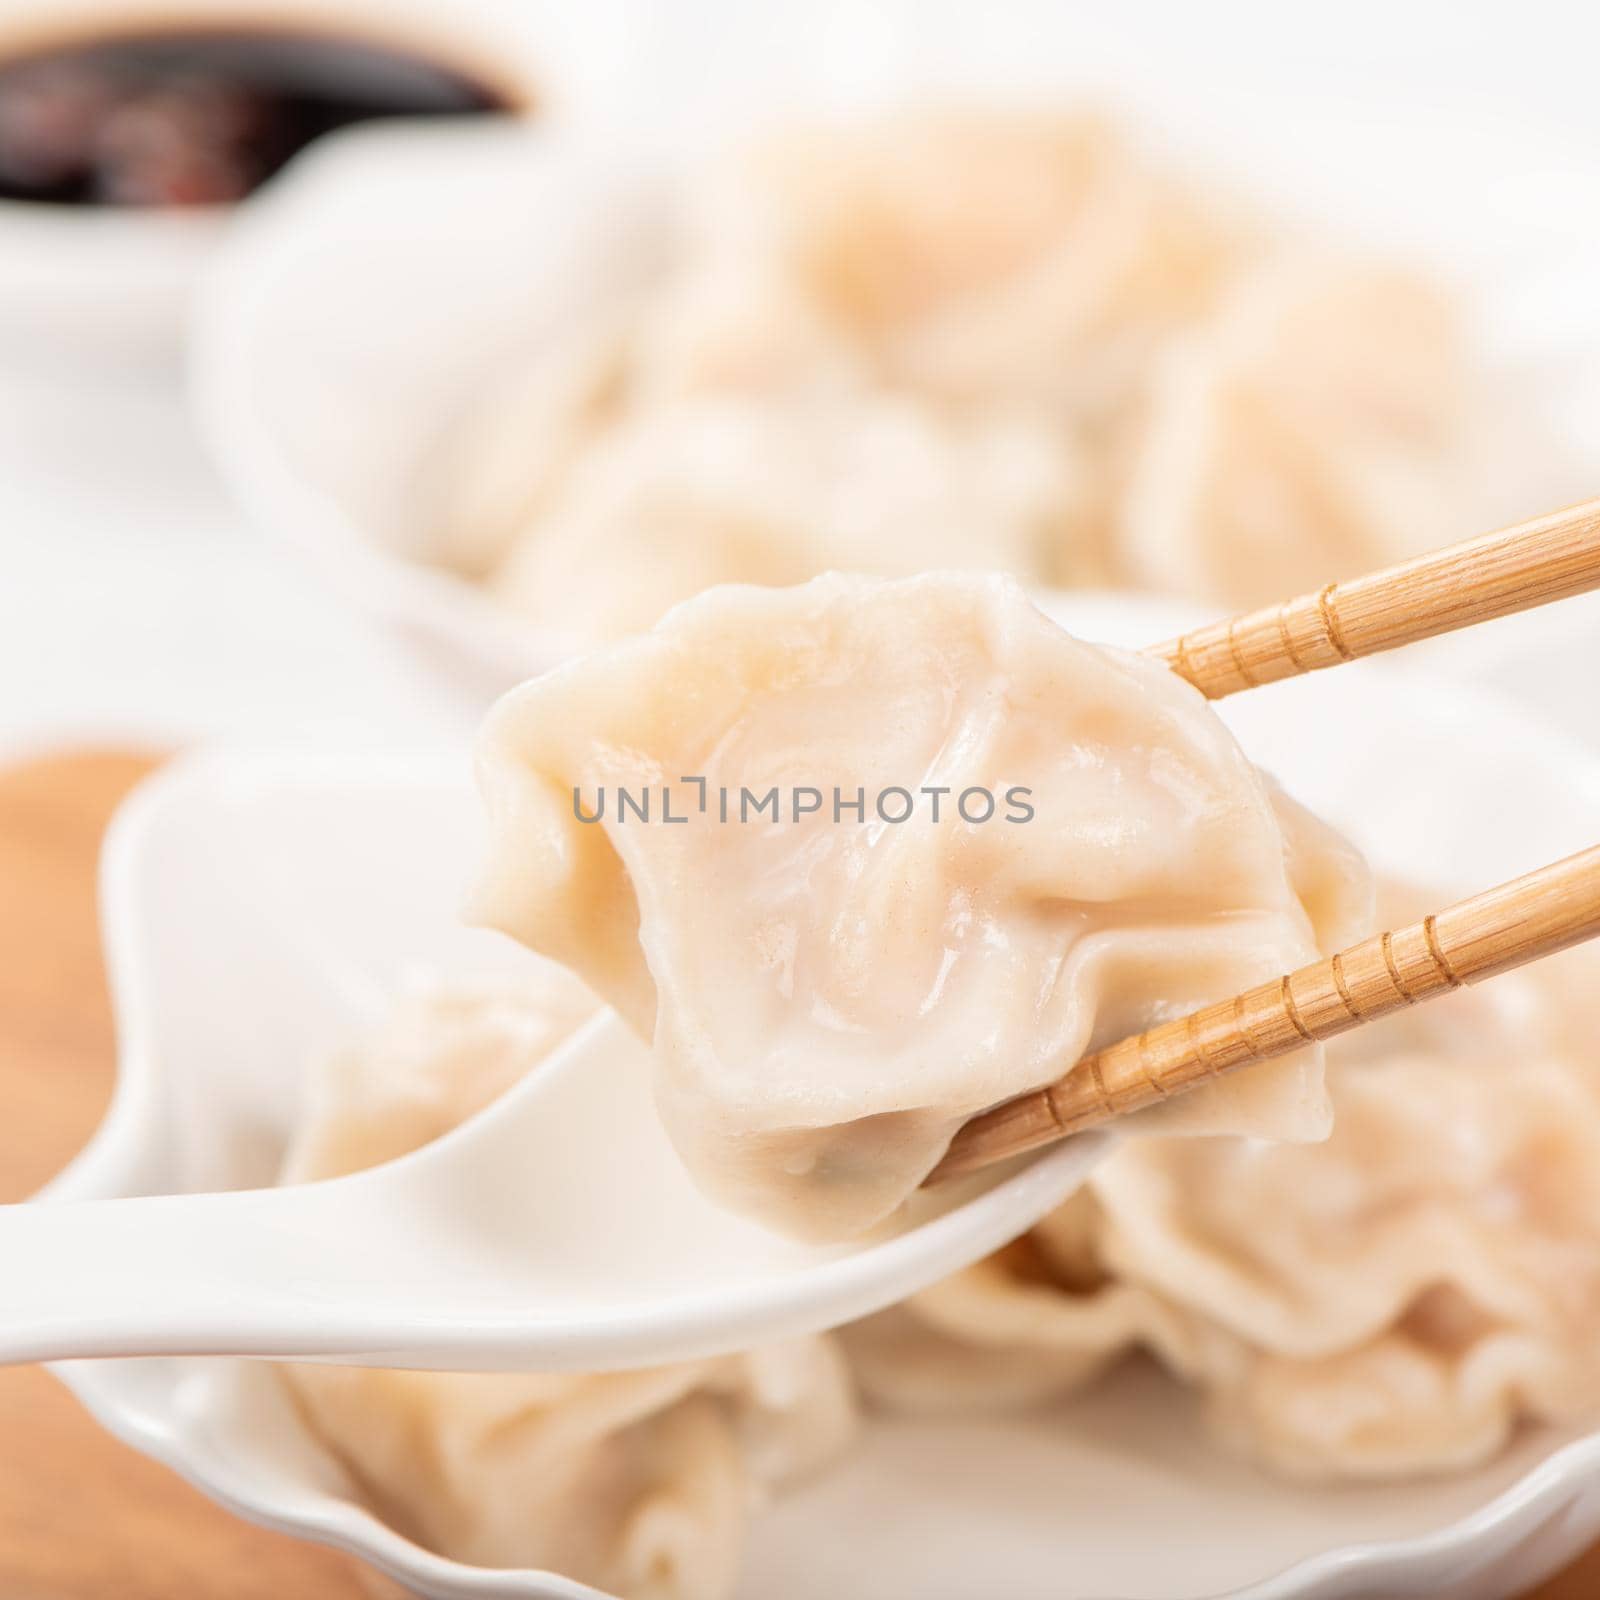 Fresh, delicious boiled pork, shrimp gyoza dumplings on white background with soy sauce and chopsticks, close up, lifestyle. Homemade design concept. by ROMIXIMAGE